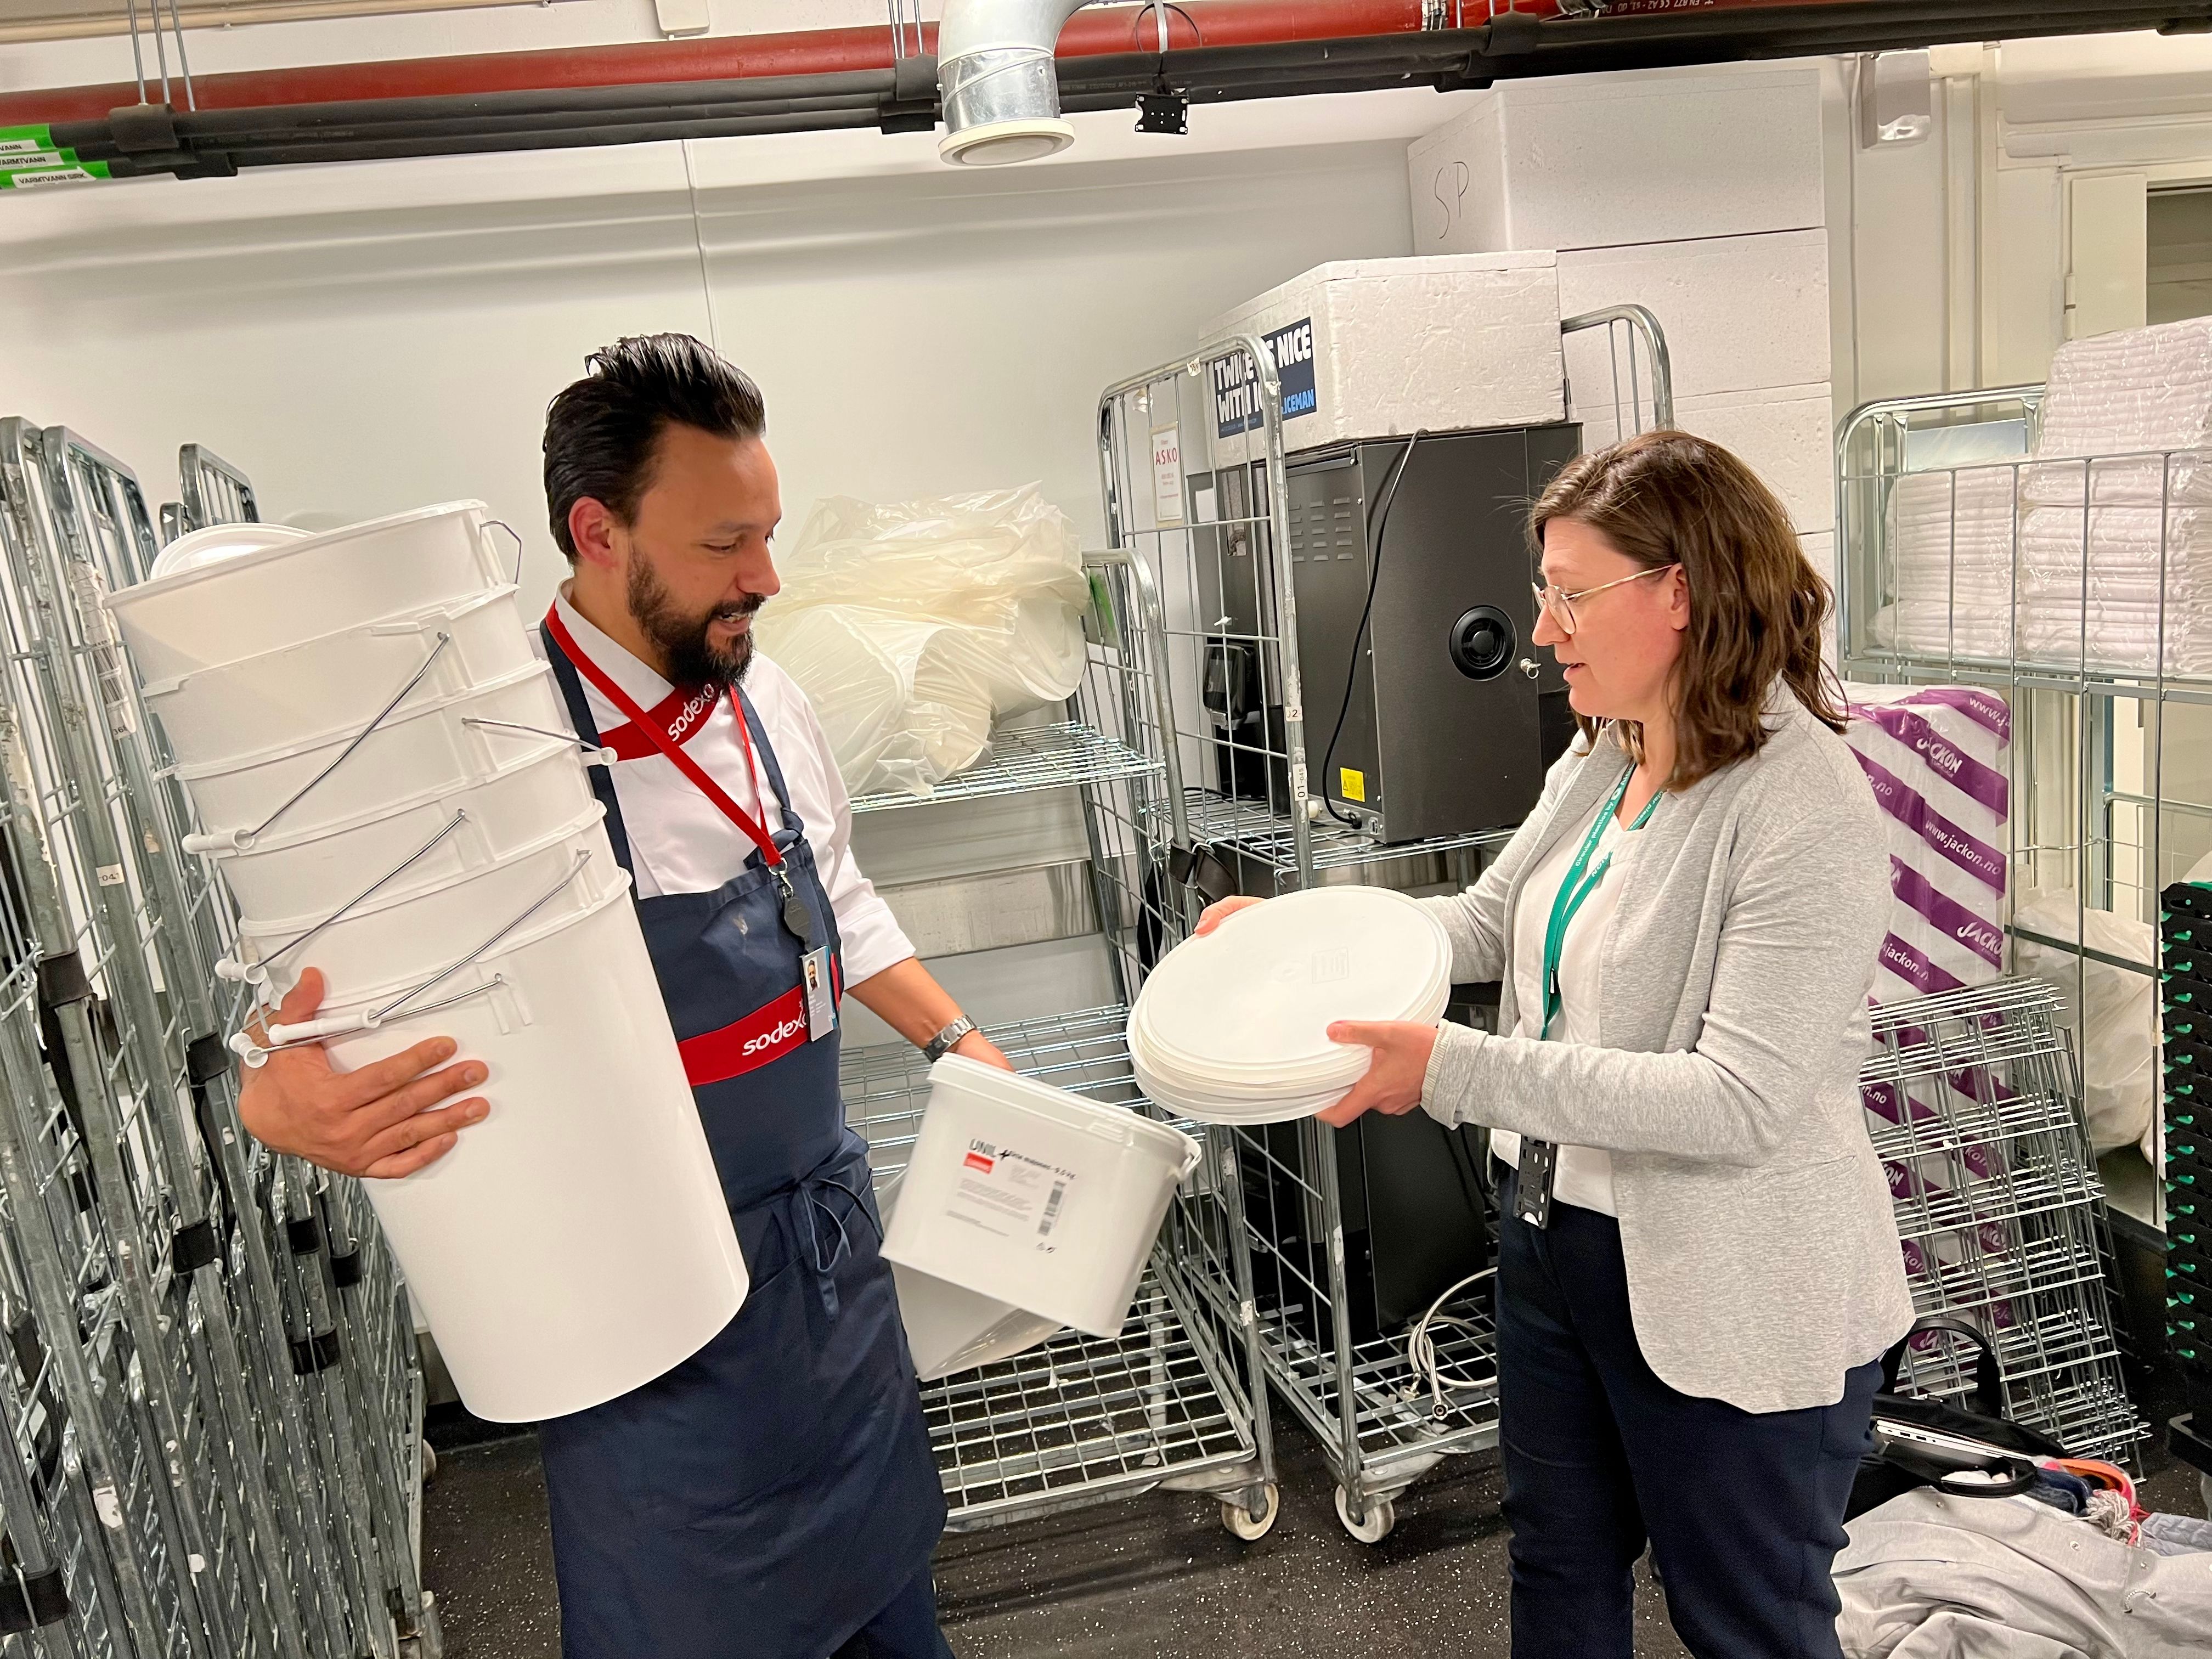 Diego Madoz from Sodexo and Dr. Susie Jahren from AION looking at empty plastic buckets.